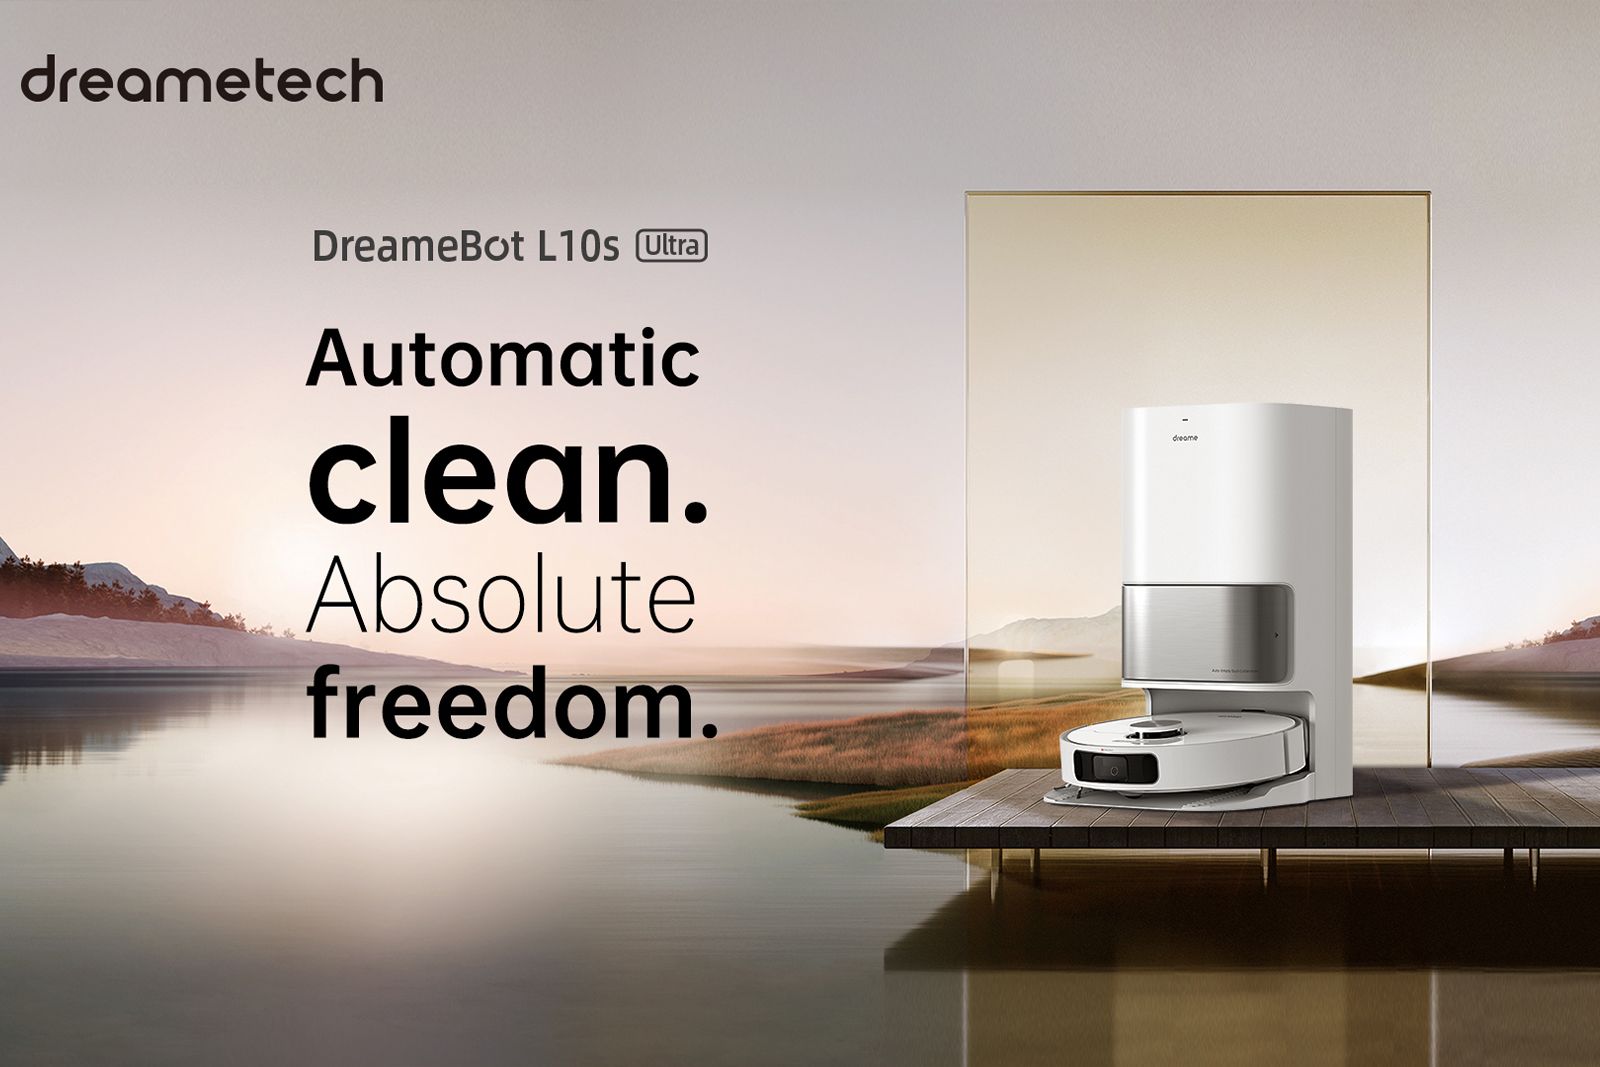 Use this amazing deal to get Dreametech’s DreameBot L10S Ultra at a bargain photo 4